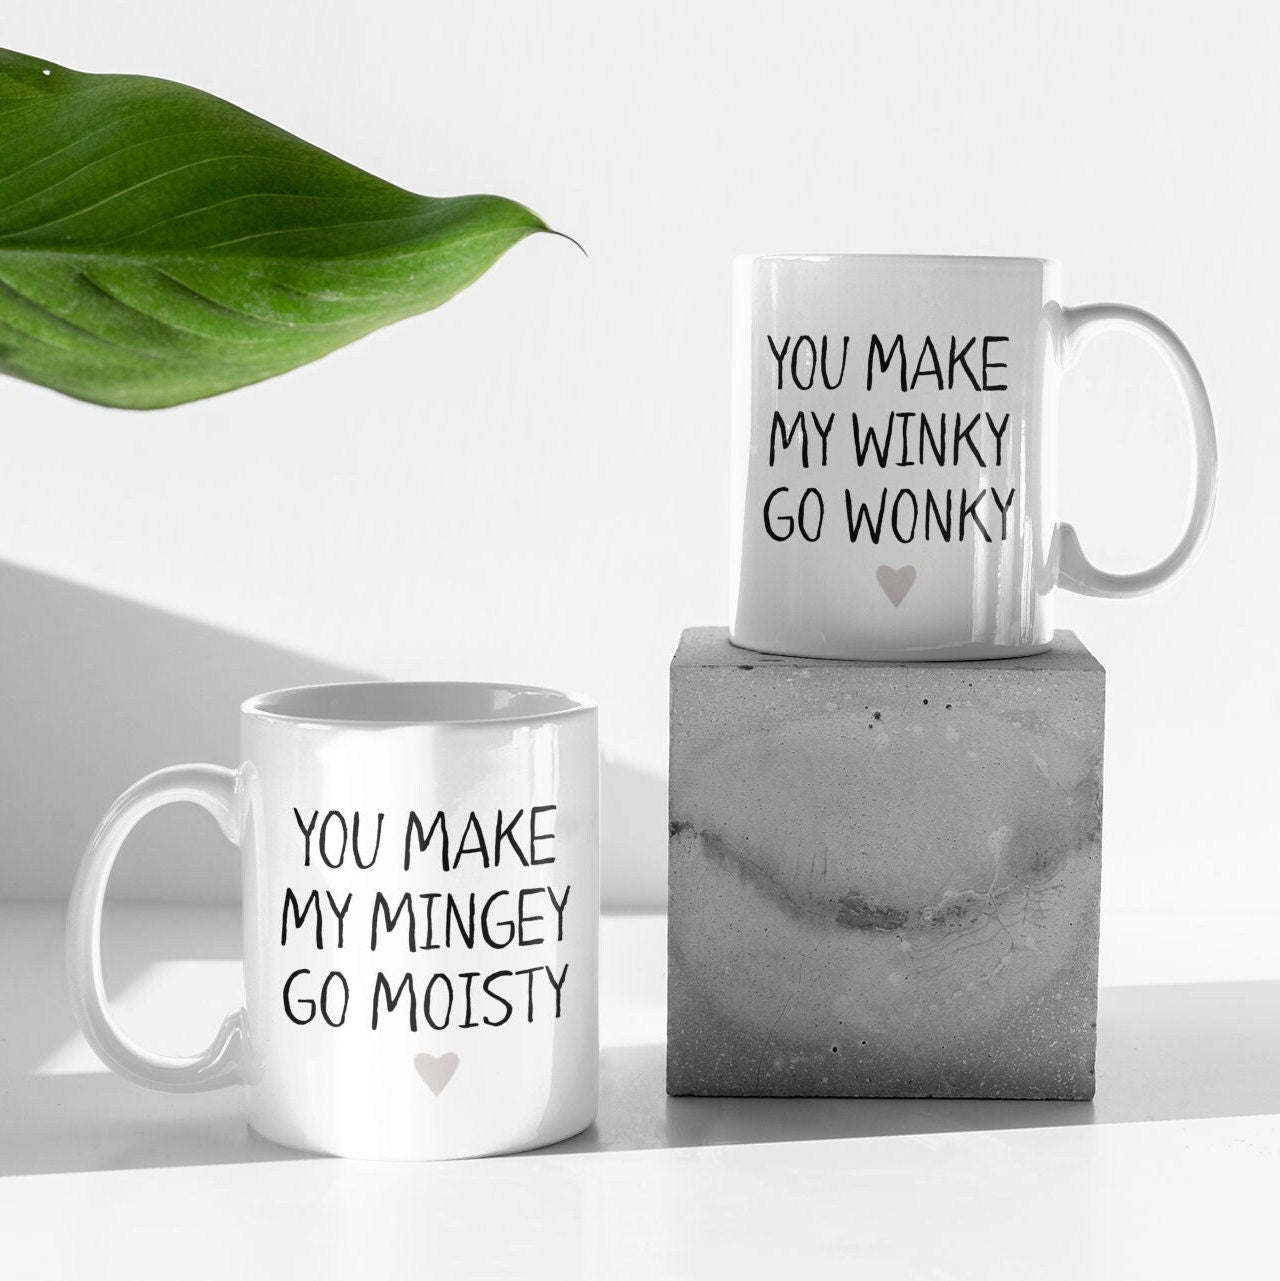 A pair of white ceramic mug featuring the funny quotes you make my mingey go moisty and you make my winky go wonky. Printed in black ink with a grey heart to the bottom centre of the design.